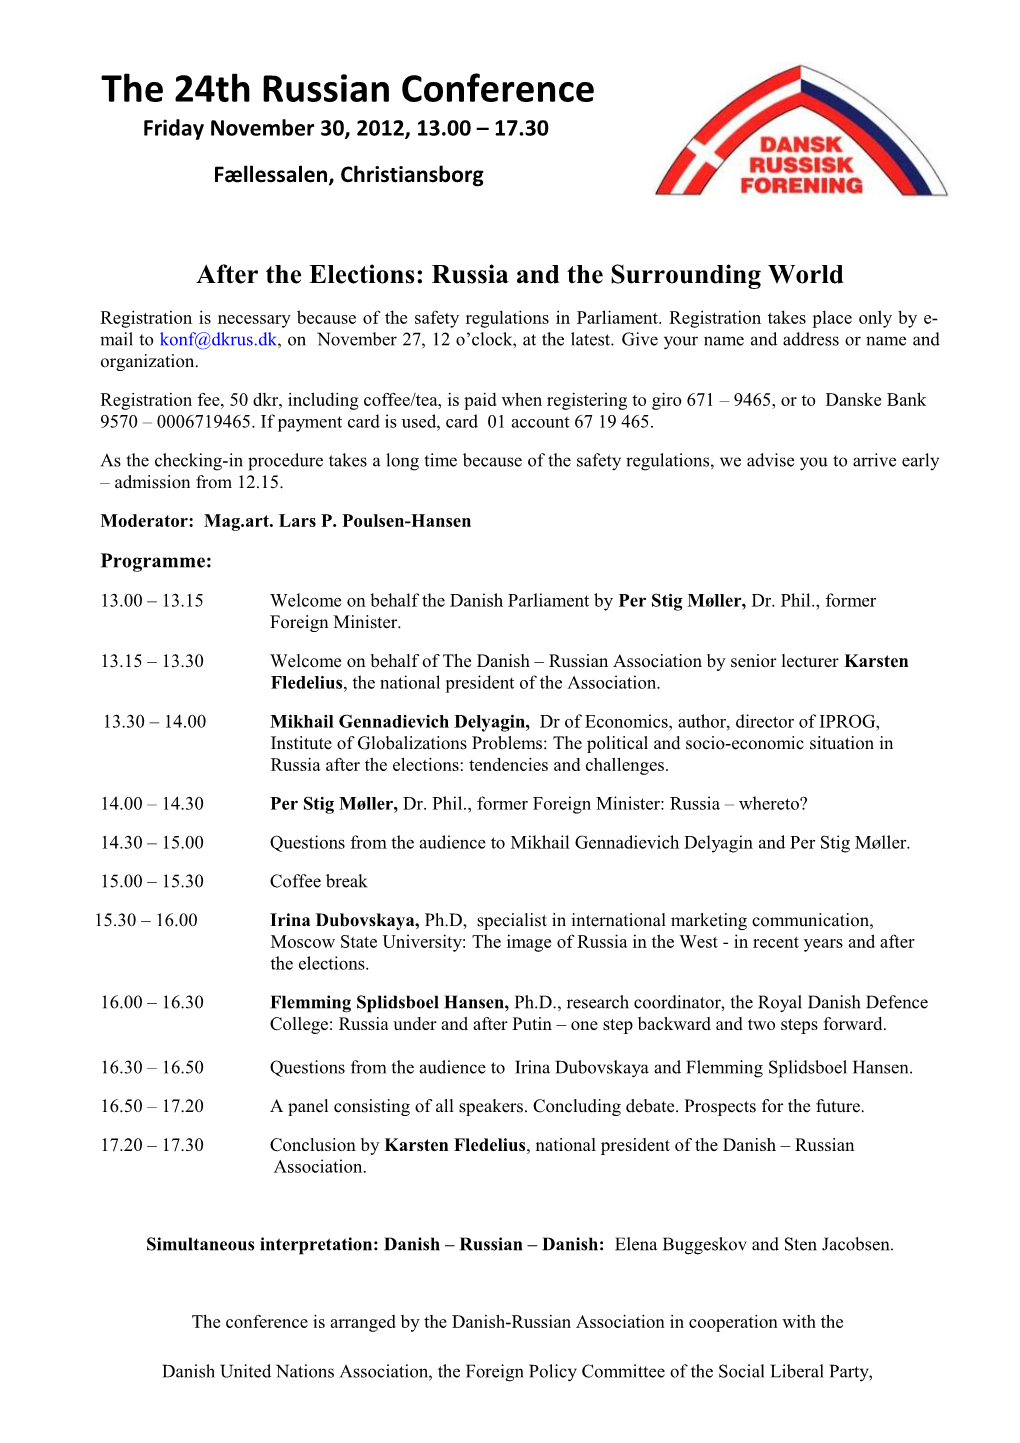 After the Elections: Russia and the Surrounding World